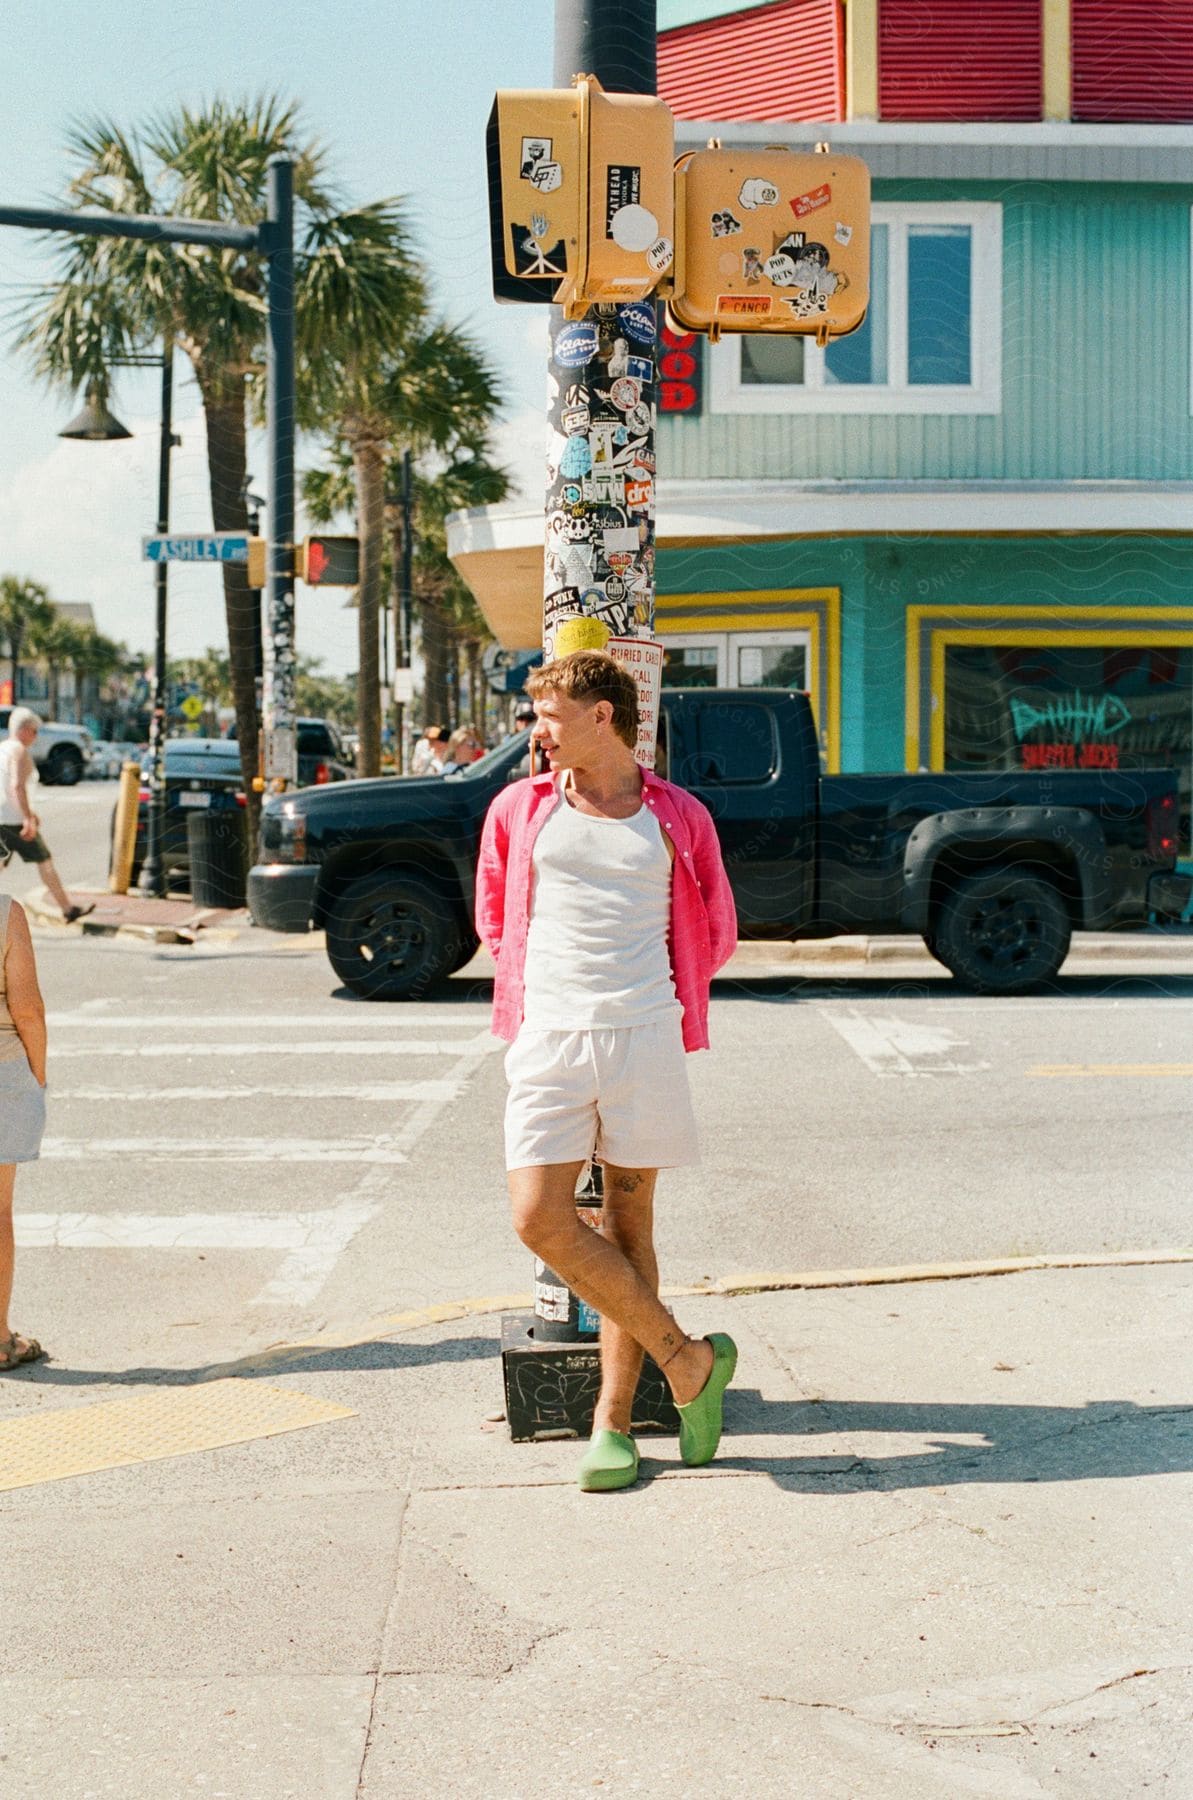 A man wearing white shorts and tee shirt with a pink shirt and green shoes leans against a traffic post